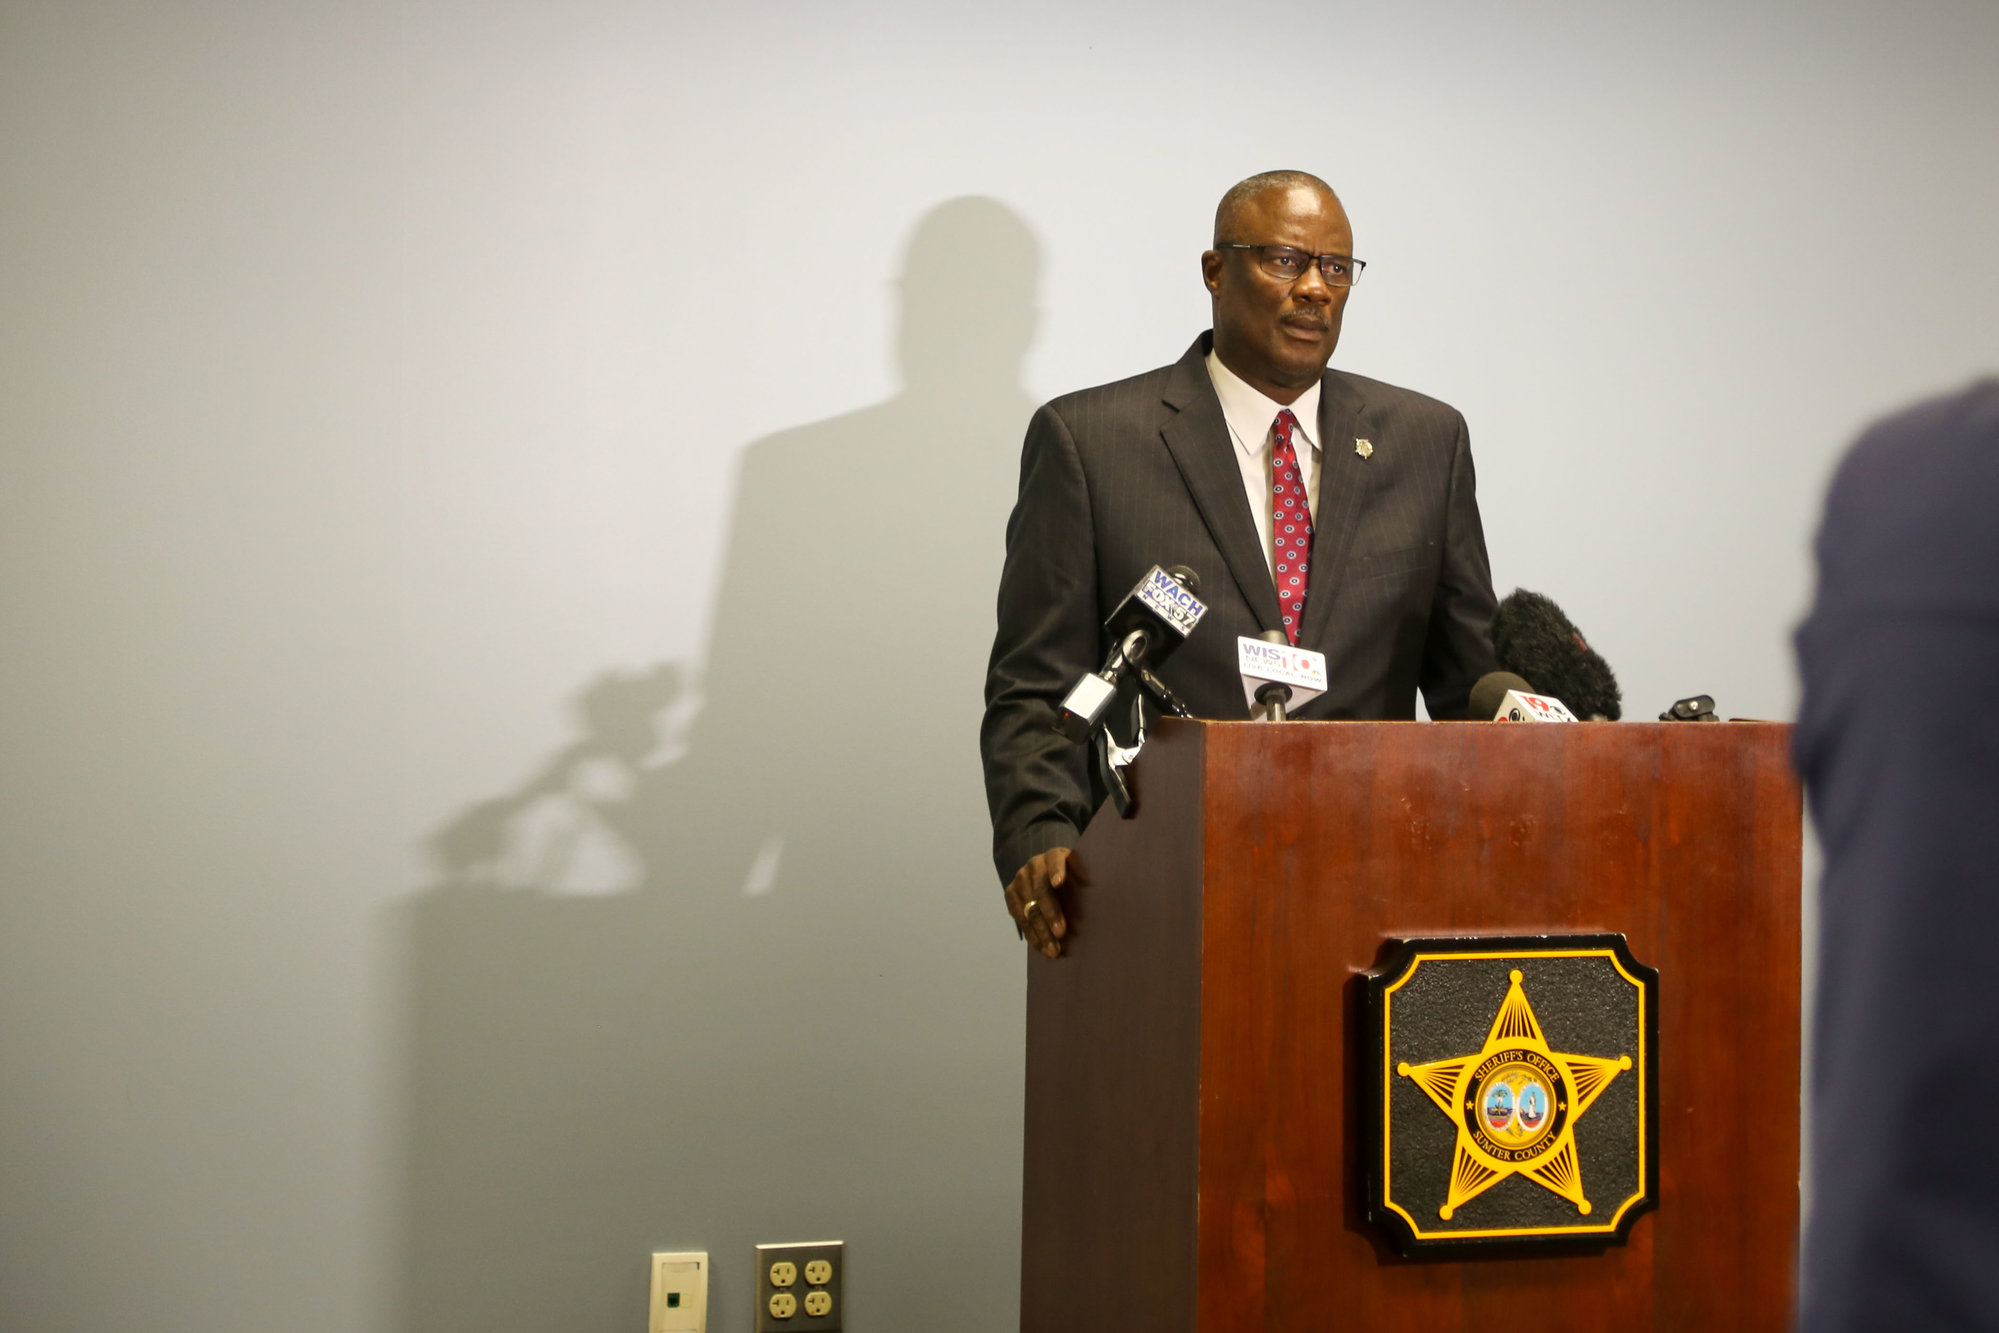 Sumter County Sheriff Anthony Dennis speaks with media on Thursday, Jan. 21, about the 1976 murder mystery of two people whose identities were just released.